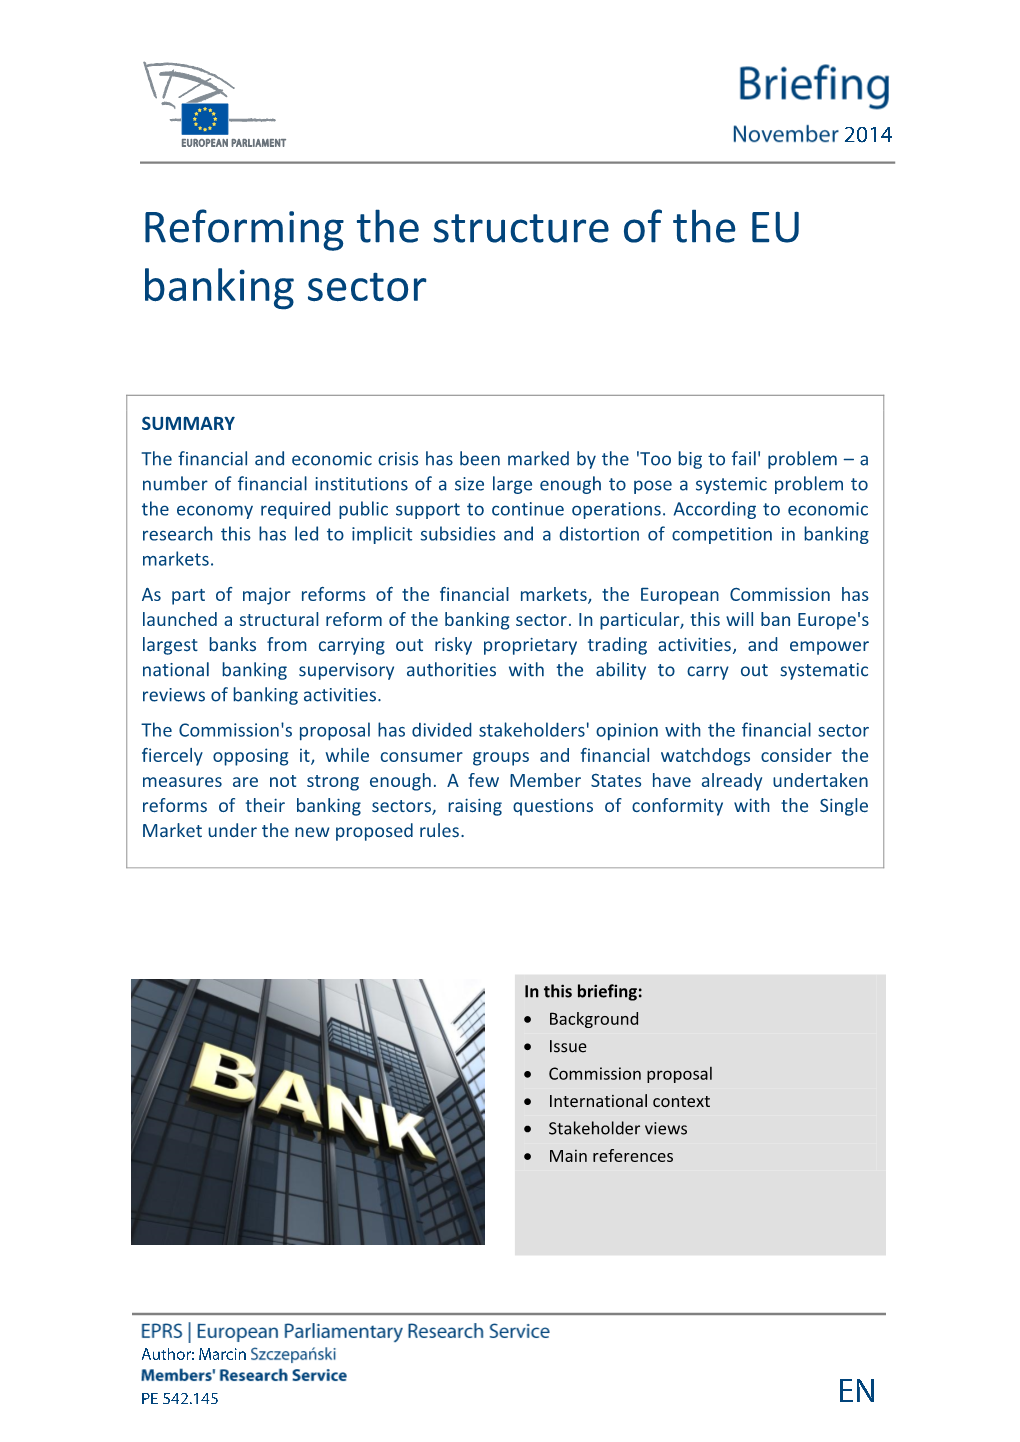 Reforming the Structure of the EU Banking Sector